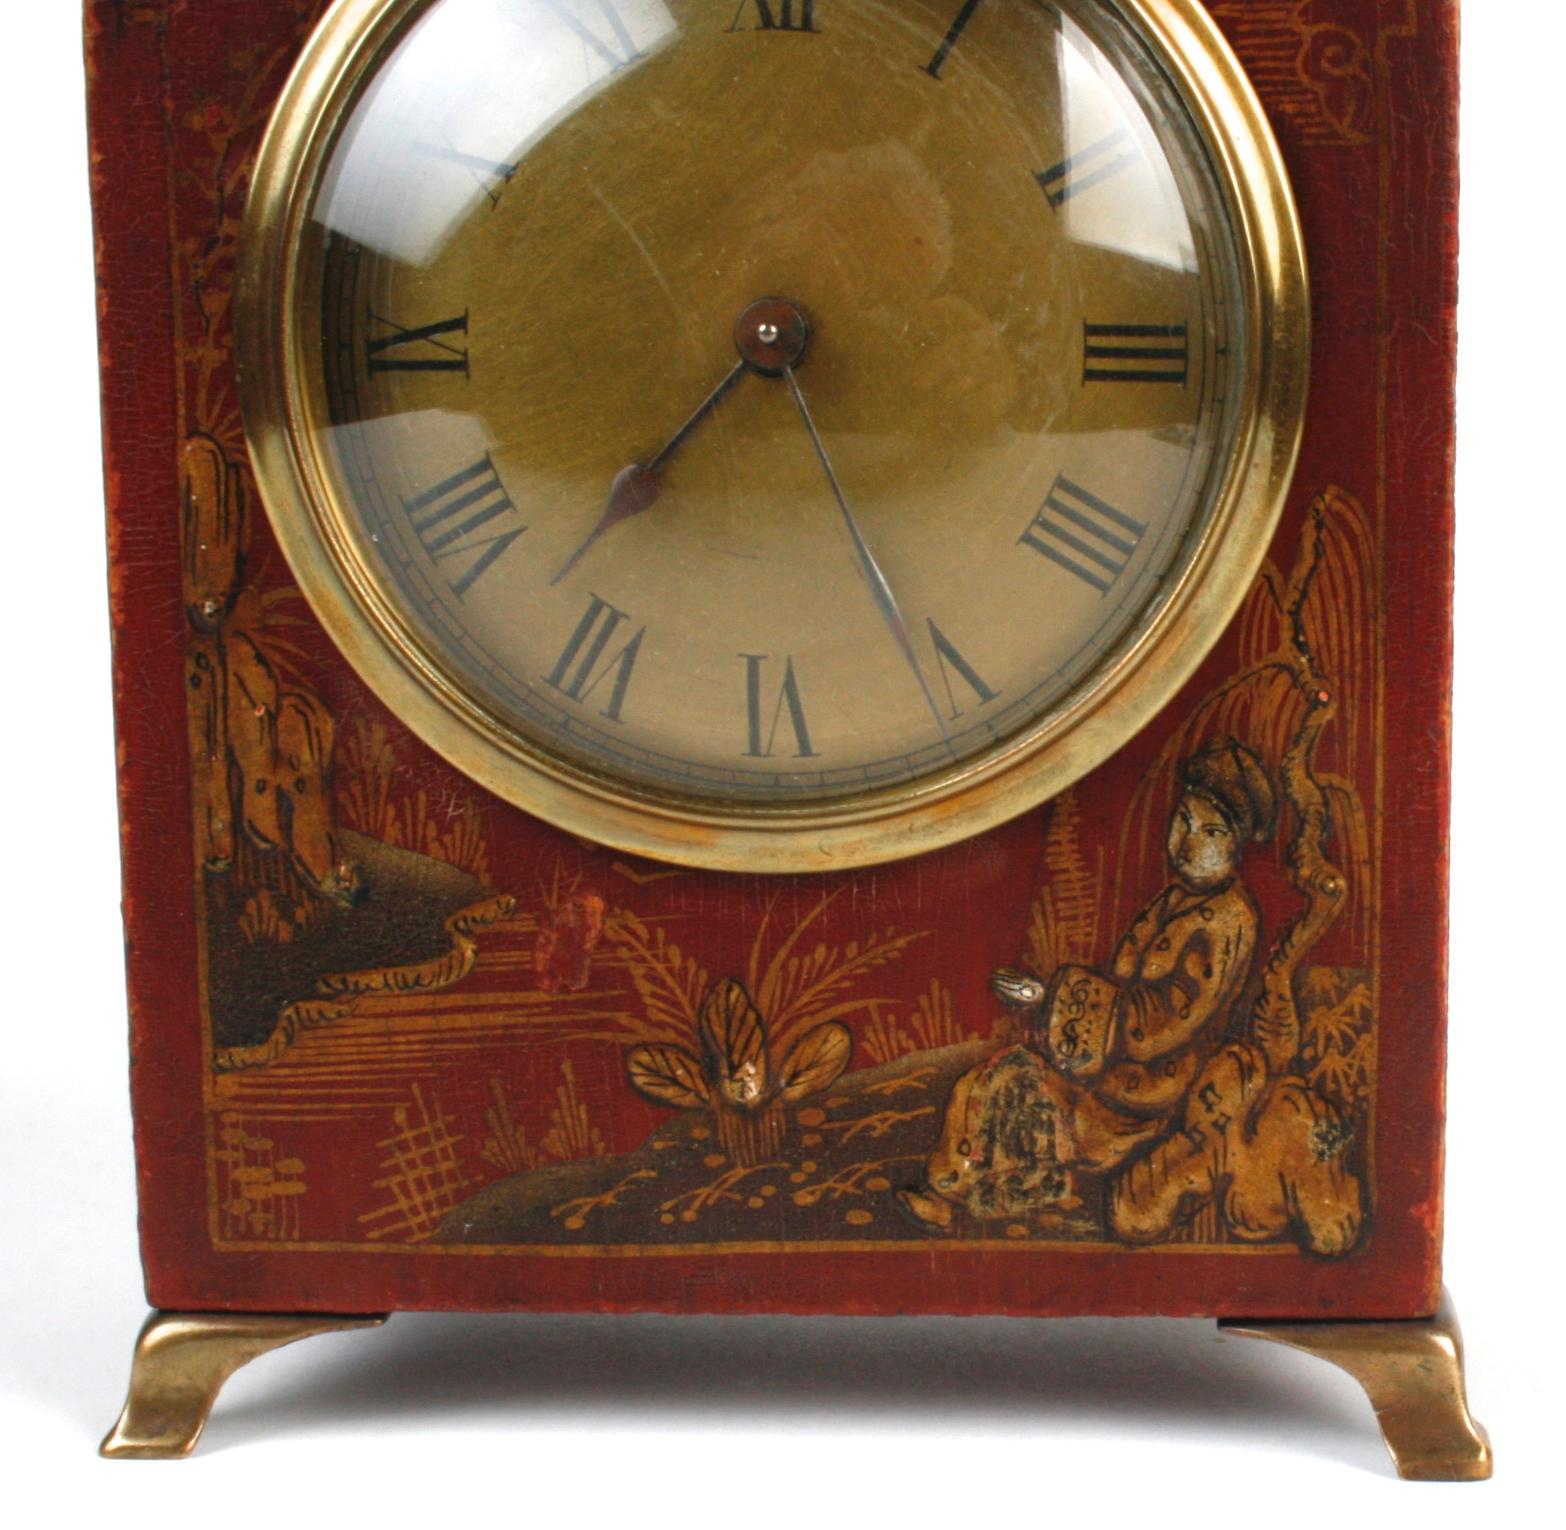 This beautiful clock containing French works is decorated with scenes of Asian country life. It has a decorative brass handle, finials, face and legs. The wooden case is painted red with raised details of gold and brown. A charming time